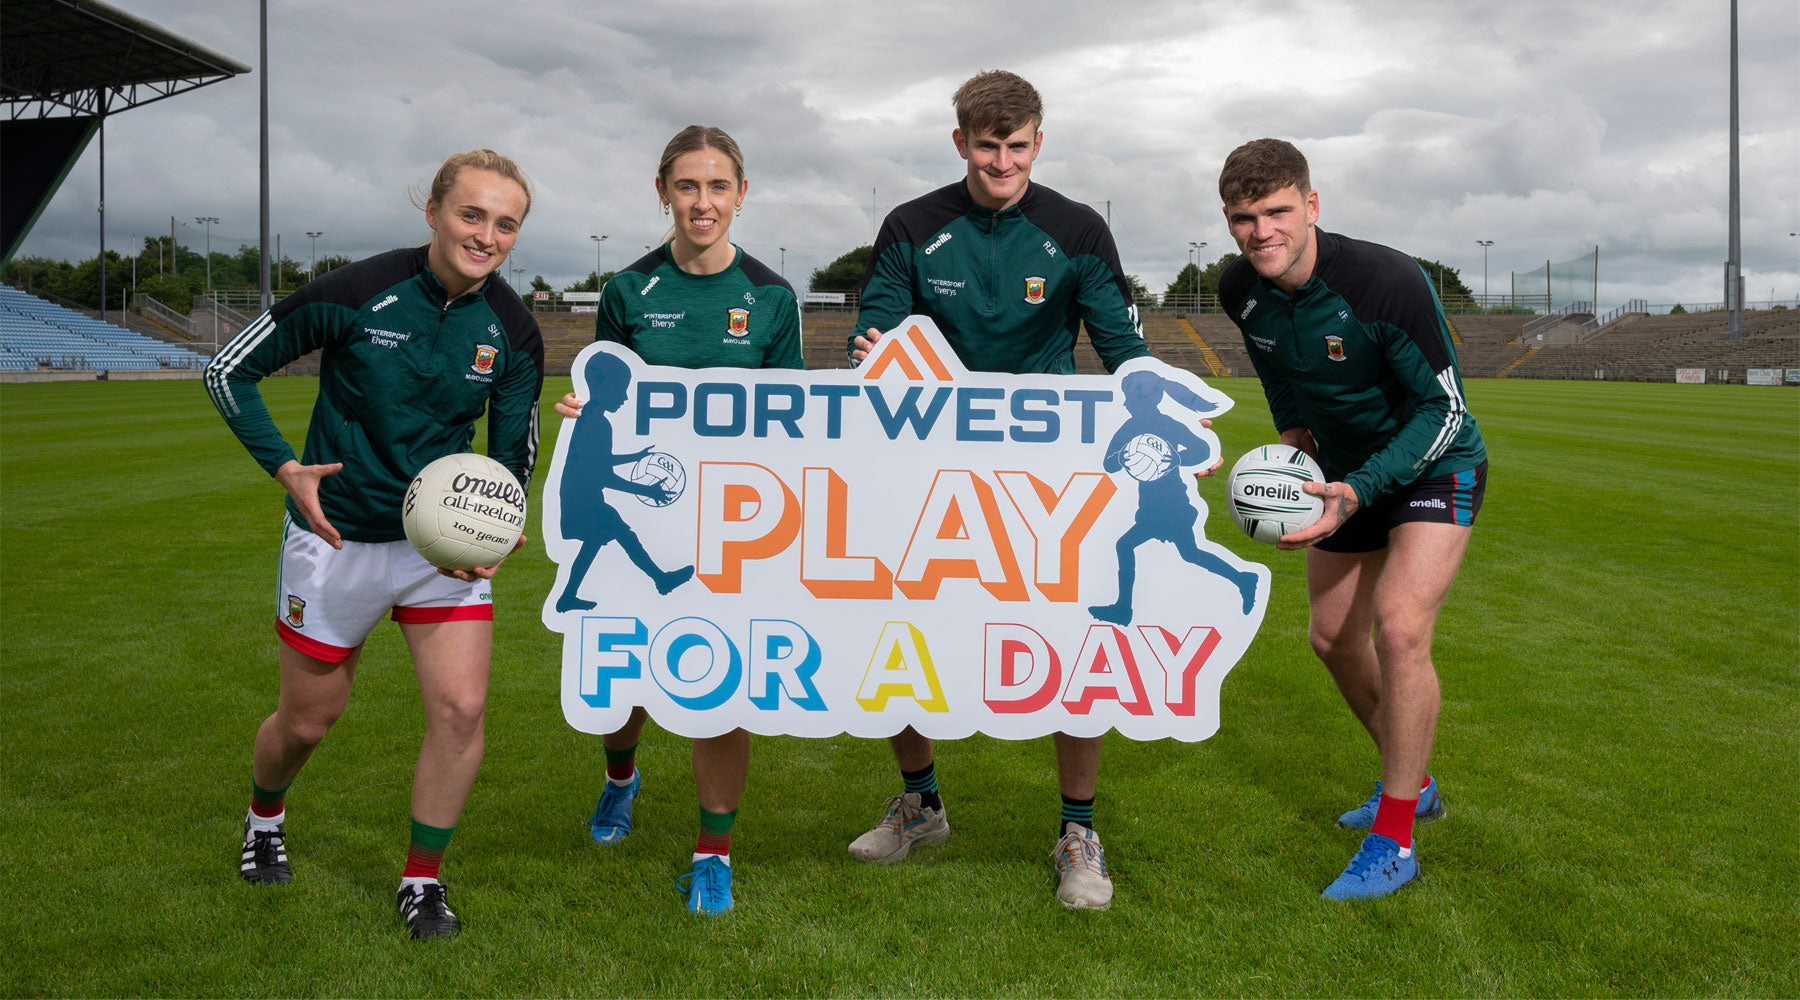 Portwest Play for a Day Competition